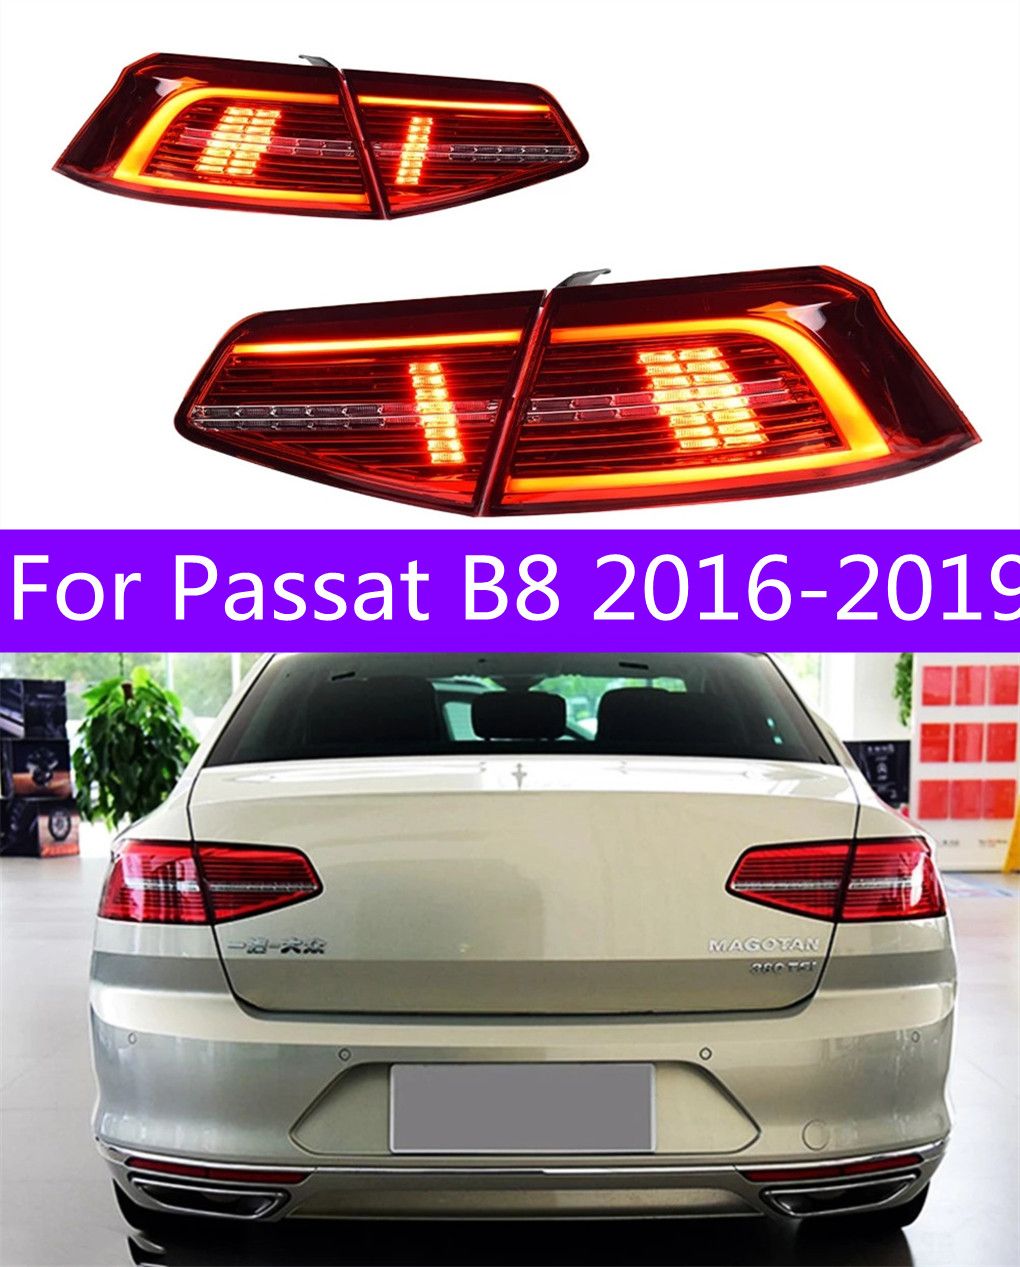 Car For 16 19 Passat B8 Original Tail Lights With Turn Signal No Animation Brake Lights From Gk_tuning, $407.54 | DHgate.Com